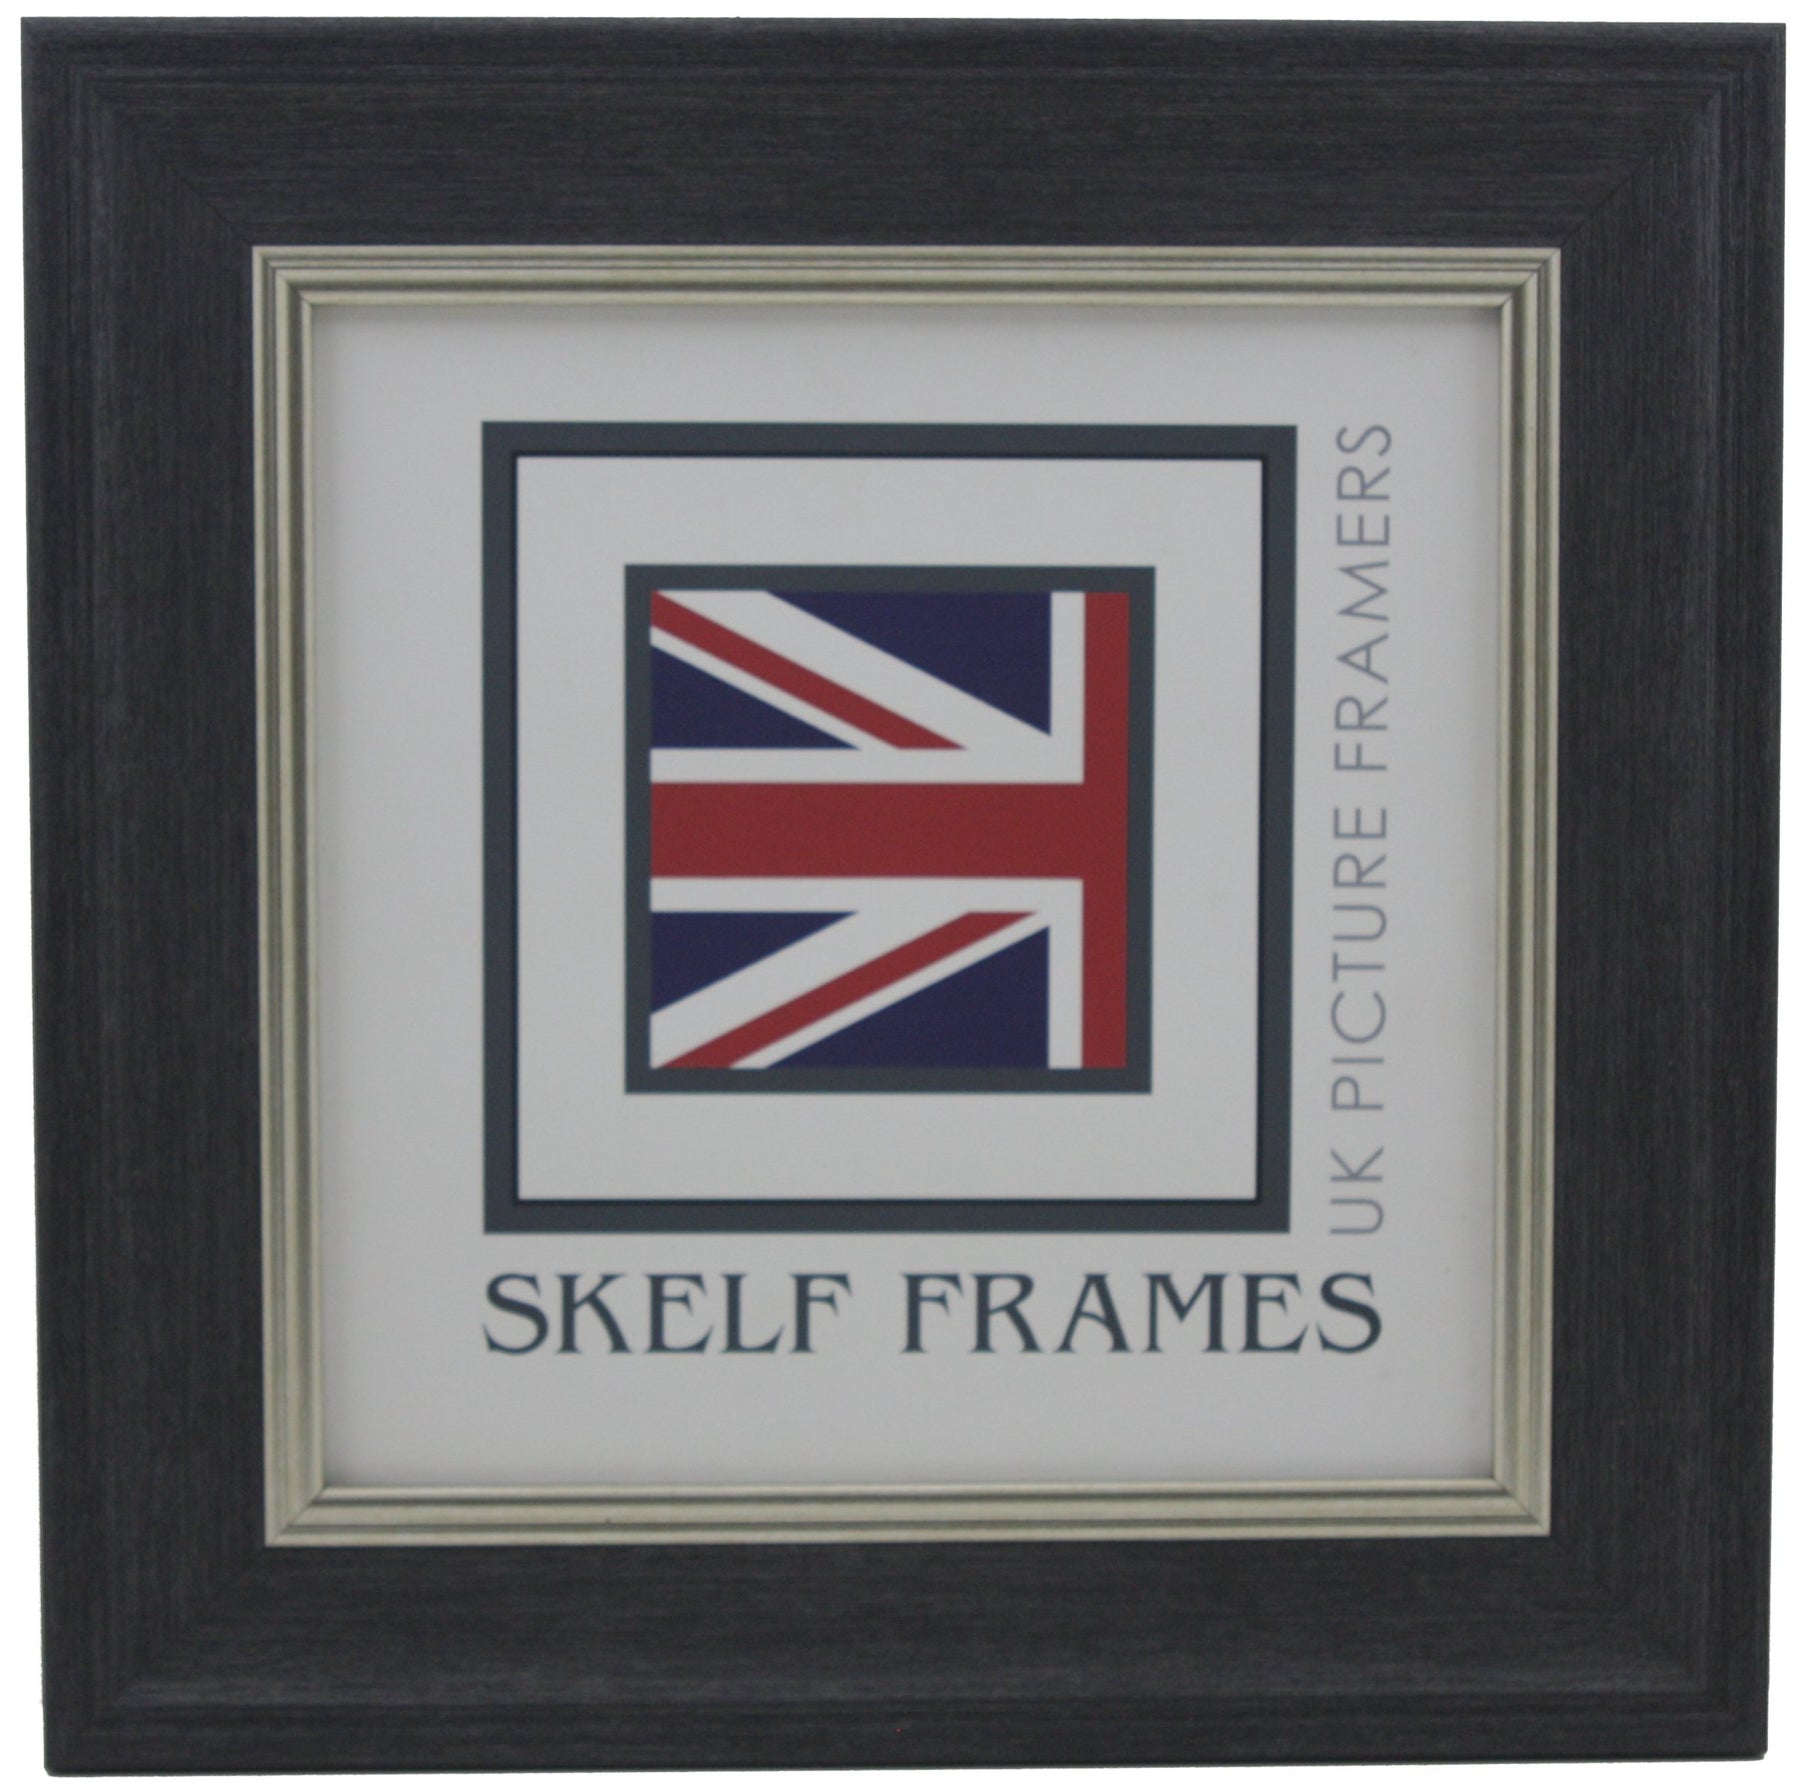 Dark Grey with Silver Inlay Cornwall - Square Frame